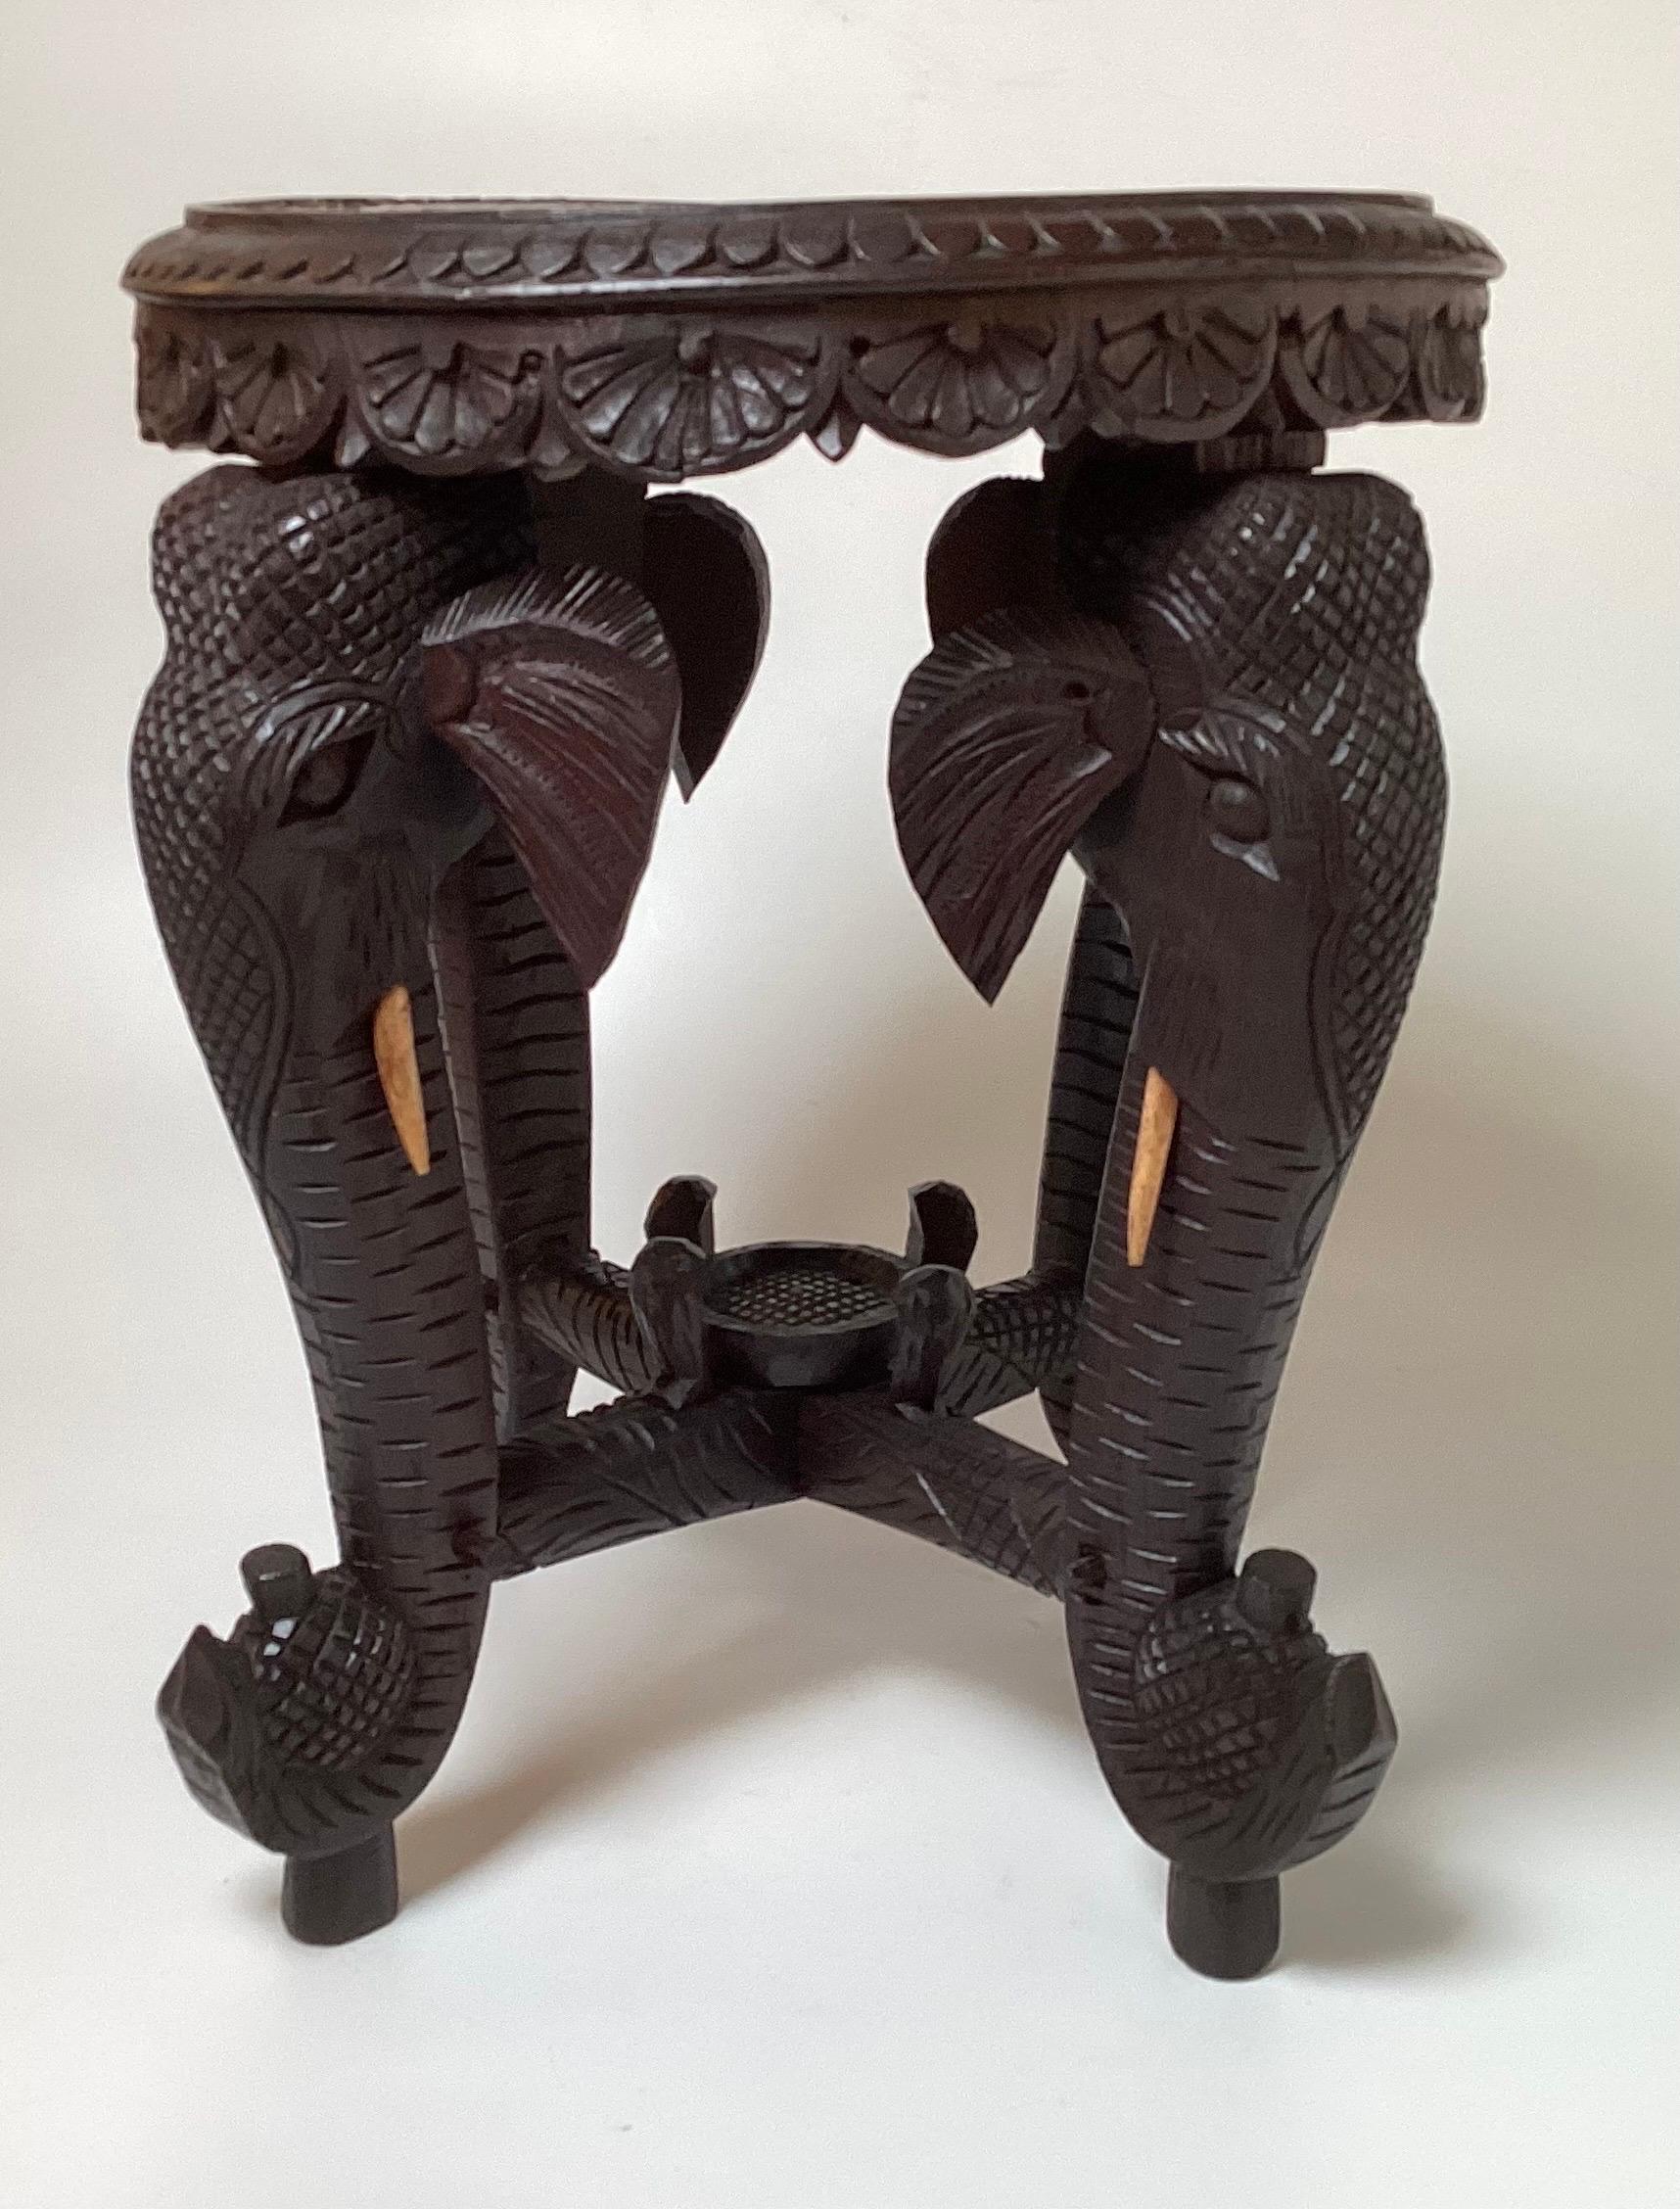 19th Century Burmese Carved Hardwood Elephant Form Table, Stand In Good Condition For Sale In Lambertville, NJ